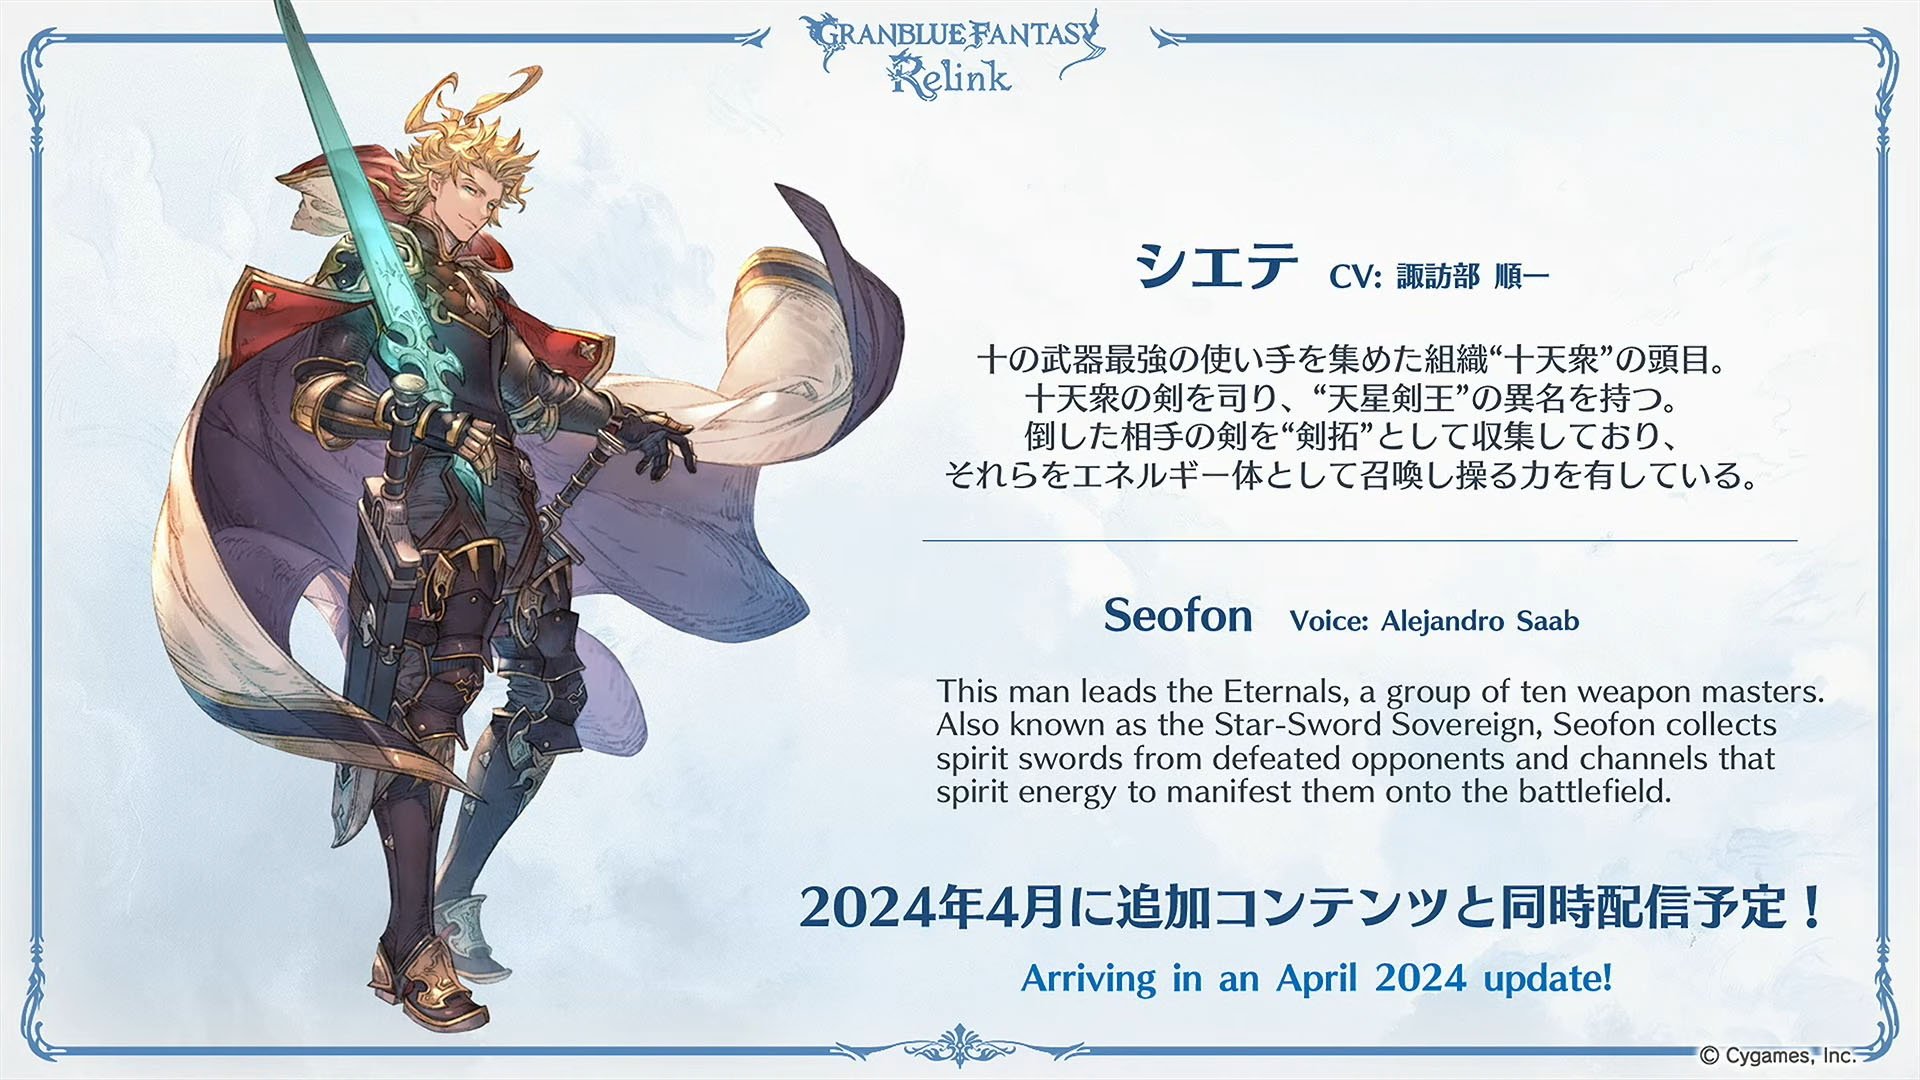 Granblue Fantasy: Relink – Two New Characters Coming in April 2024